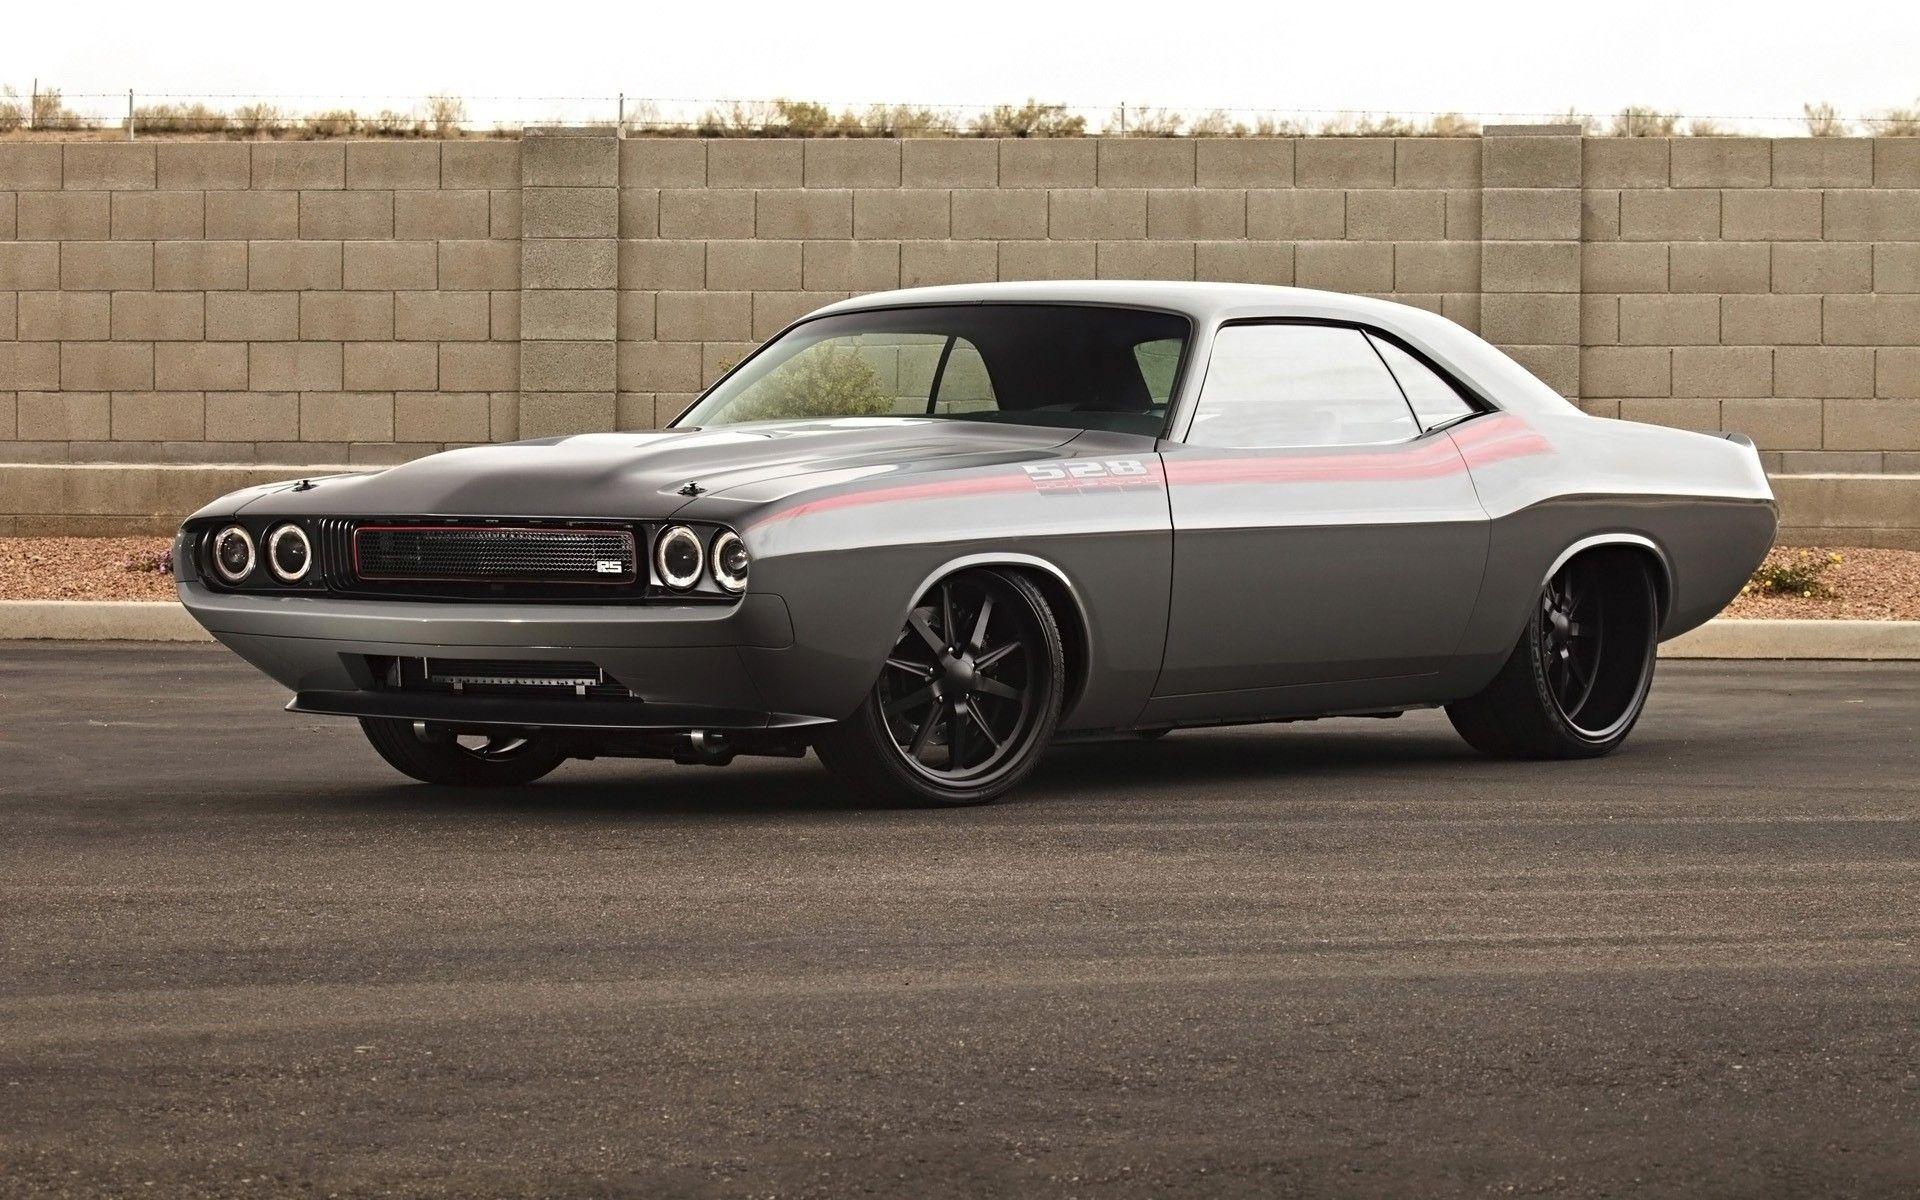 Dodge Challenger. Android wallpaper for free